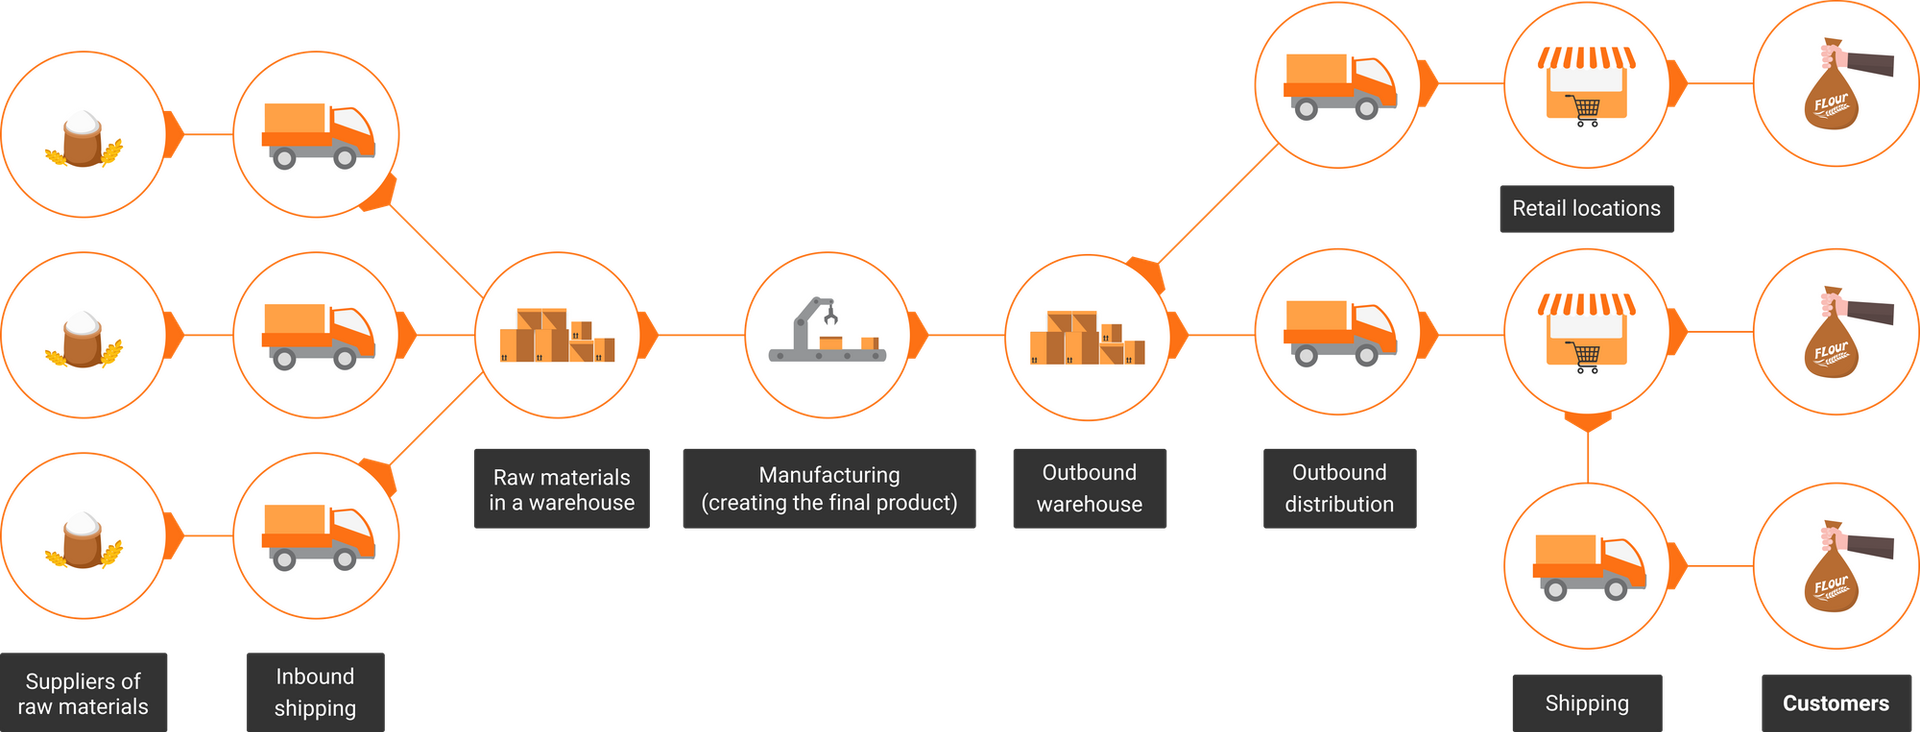 realistic manufacturing supply chain diagram